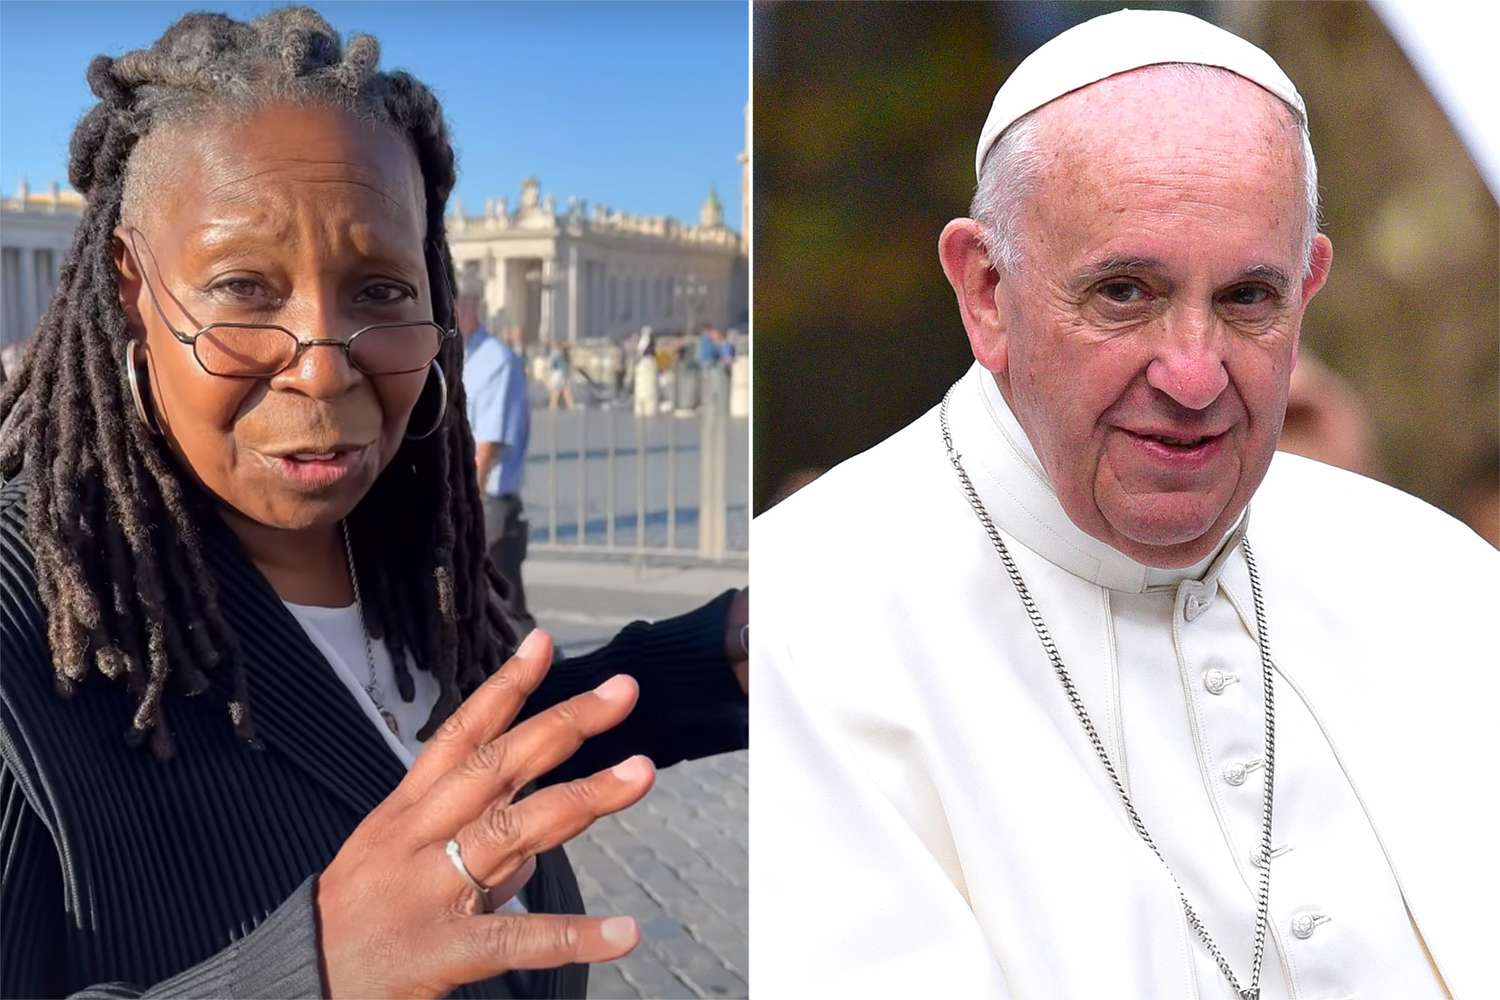 Whoopi Goldberg offered Pope Francis a 'Sister Act 3' cameo